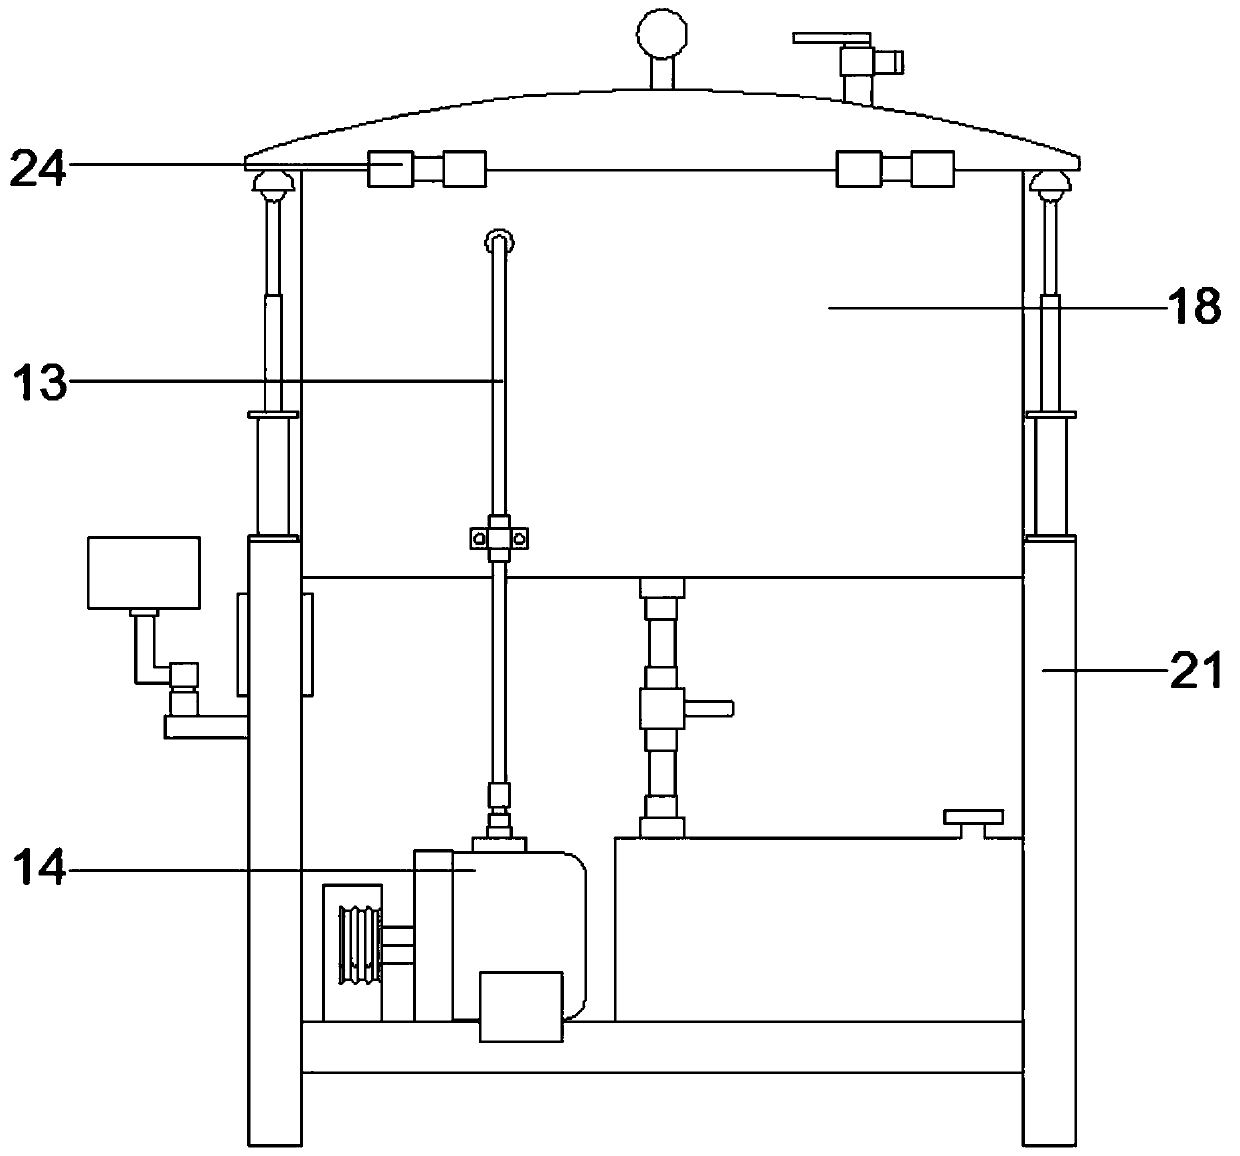 A high-frequency transformer automatic vacuum impregnation machine and its working method